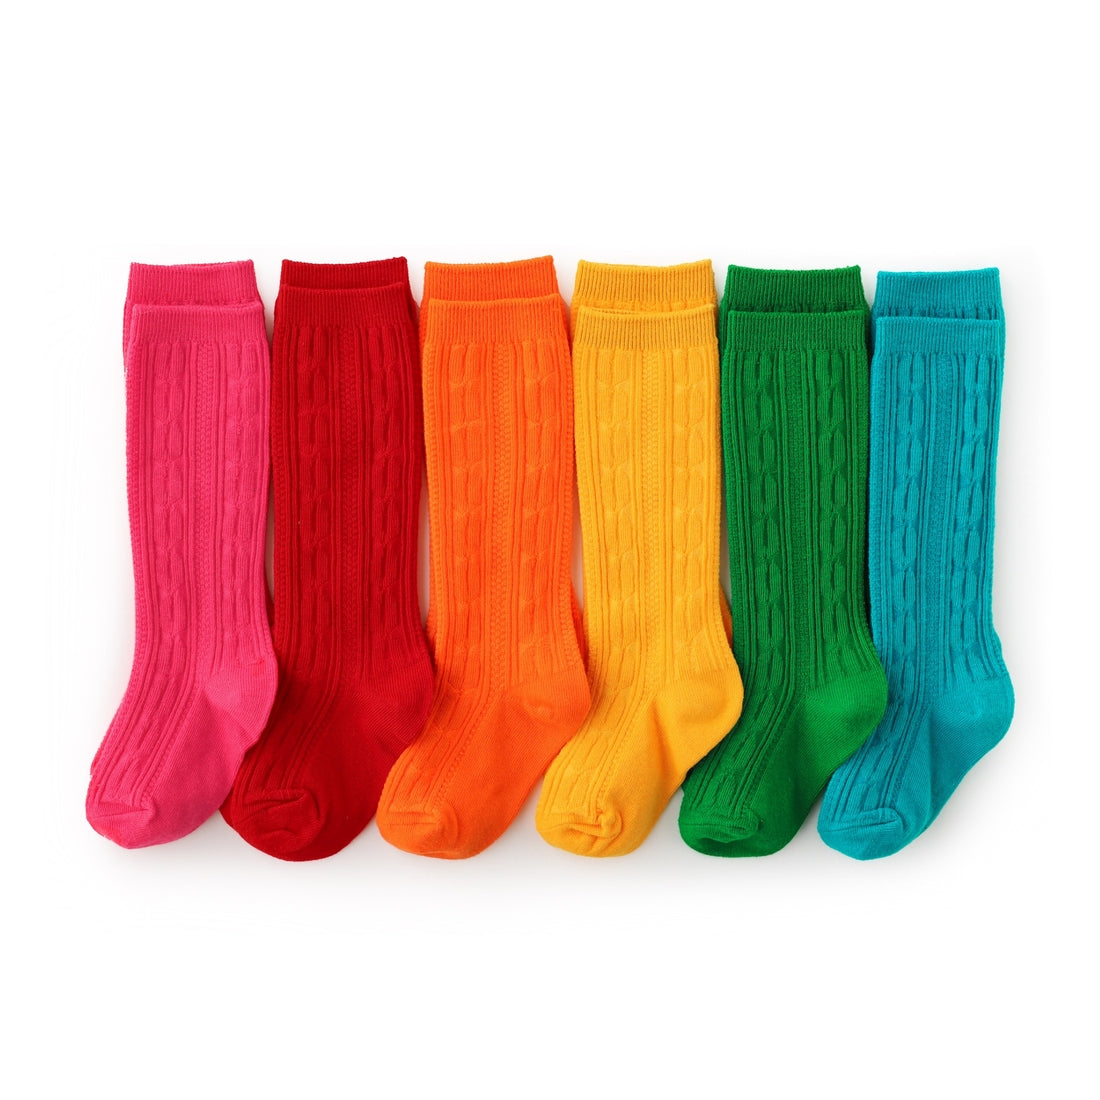 Little Stocking Co. brights cable knit bundle against white backdrop